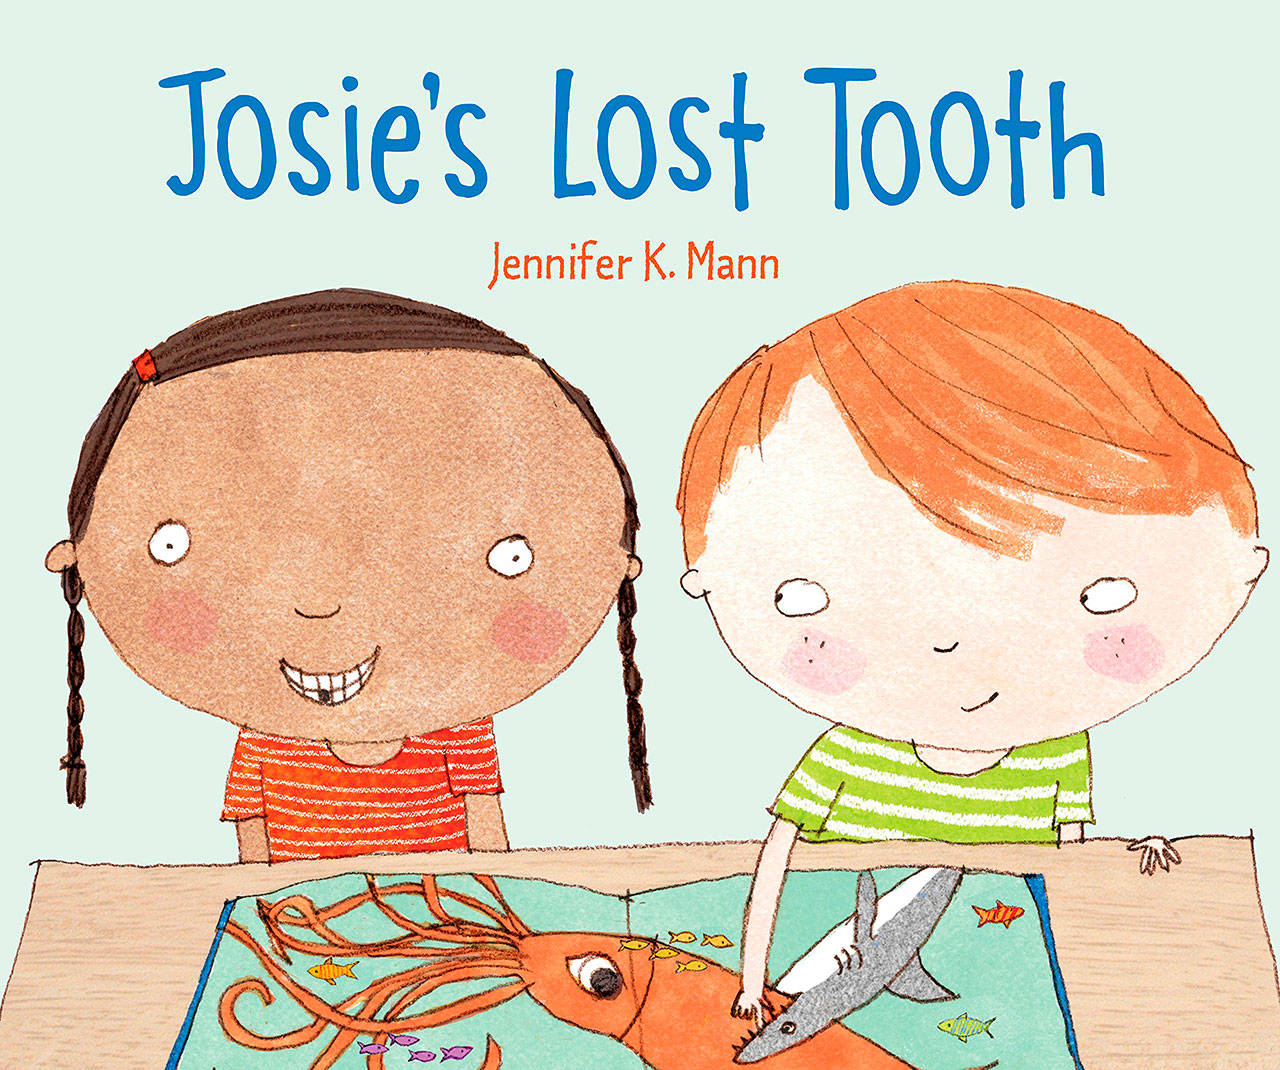 Image courtesy of Eagle harbor Book Company                                 Bainbridge Island author Jennifer Mann will debut her latest book, “Josie’s Lost Tooth,” at Eagle harbor Book Company at 3 p.m. Saturday, Nov. 17.